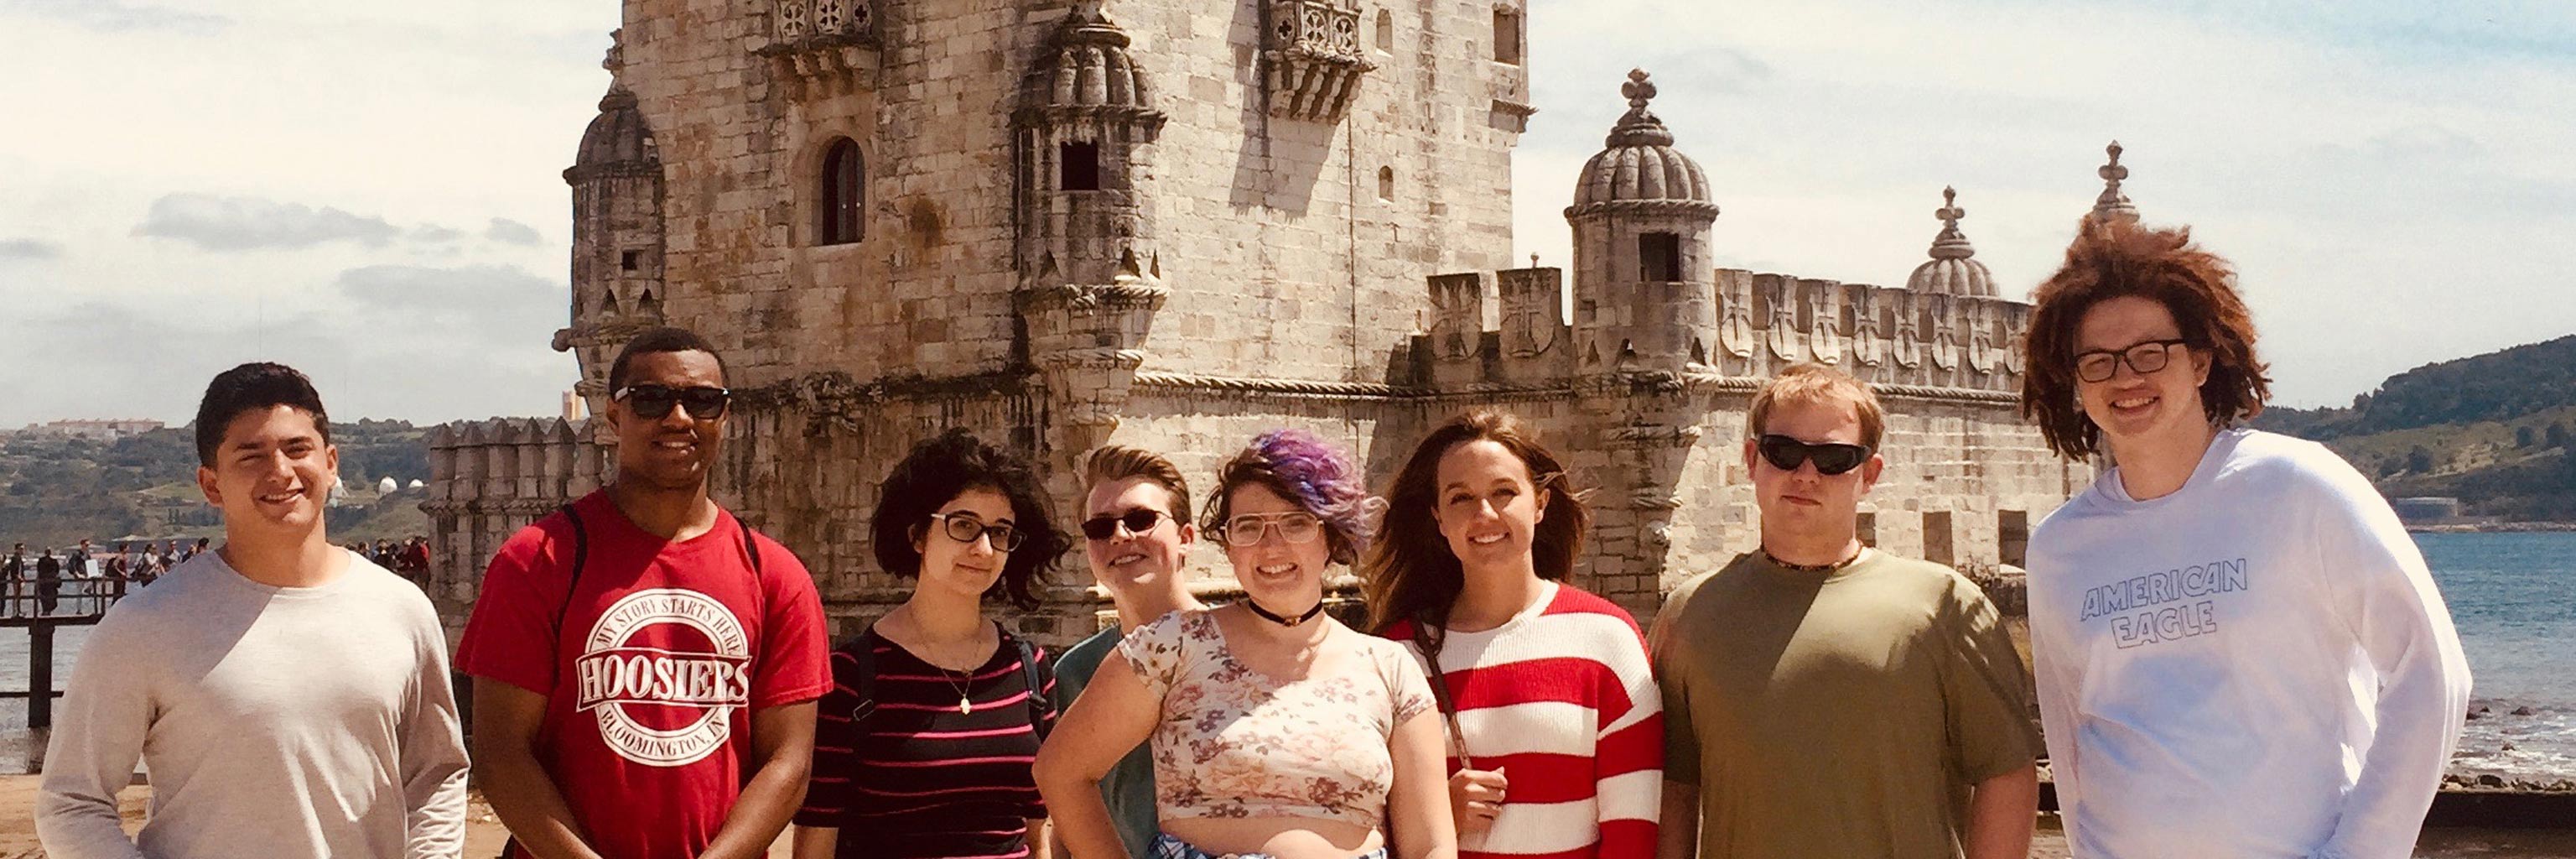 A large group of students smile in front of an ornate building located in their study abroad destination 